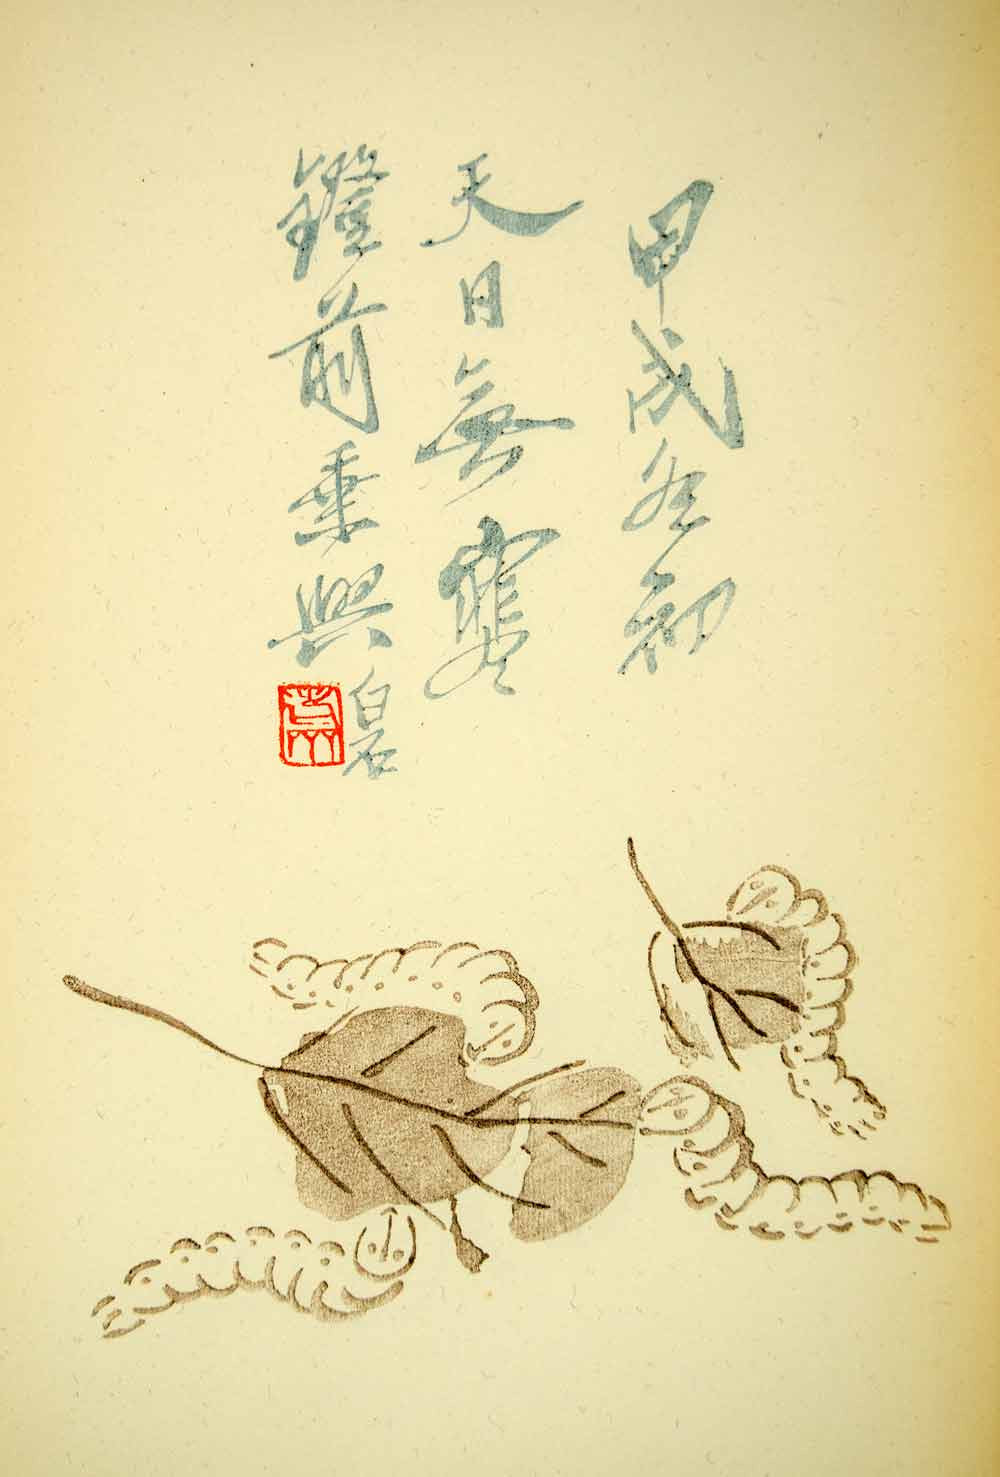 1953 Lithograph Chi Pai-Shih Silk Worms Mulberry Leaves Caterpillar Nature Art - Period Paper
